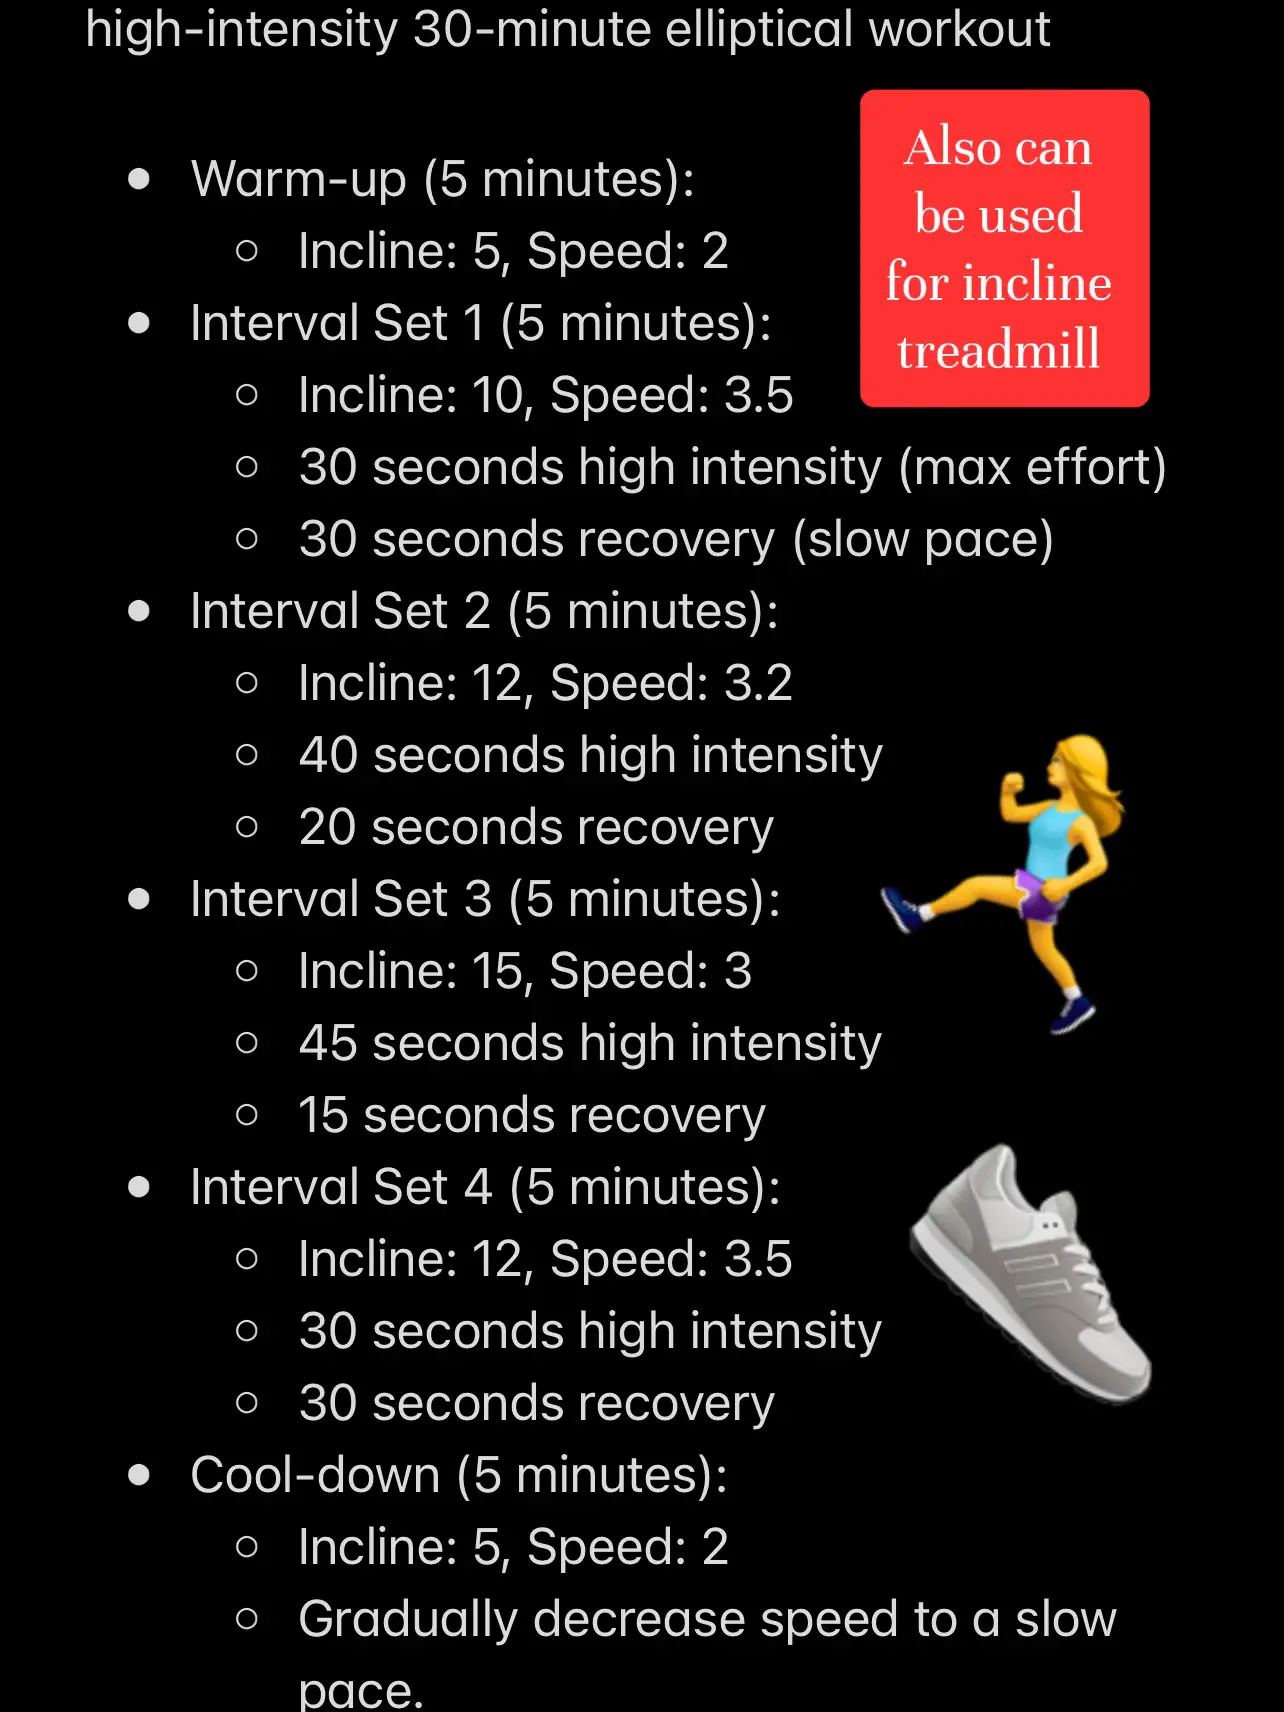 Lower body hiit workout 4 rounds 30 seconds. Rest 30 seconds after each set  . Wanna target the quads , hamstrings, and glutes ? Try this I have spots  available for in